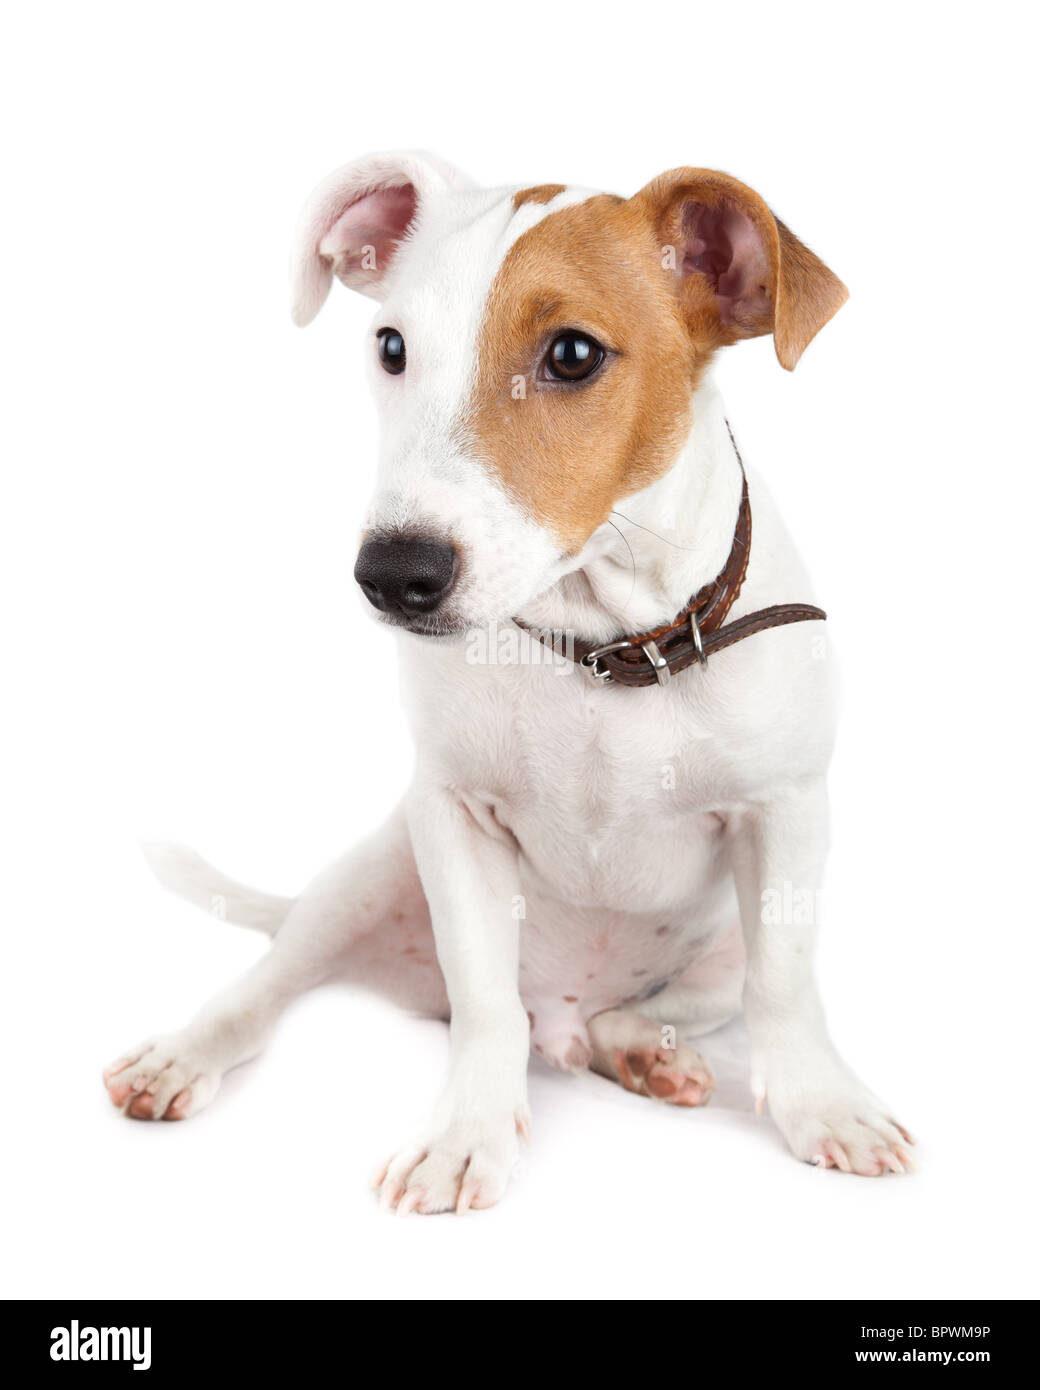 Puppy of a dog in studio against a white background. A Jack Russell terrier is a dog with a high level of energy. Stock Photo